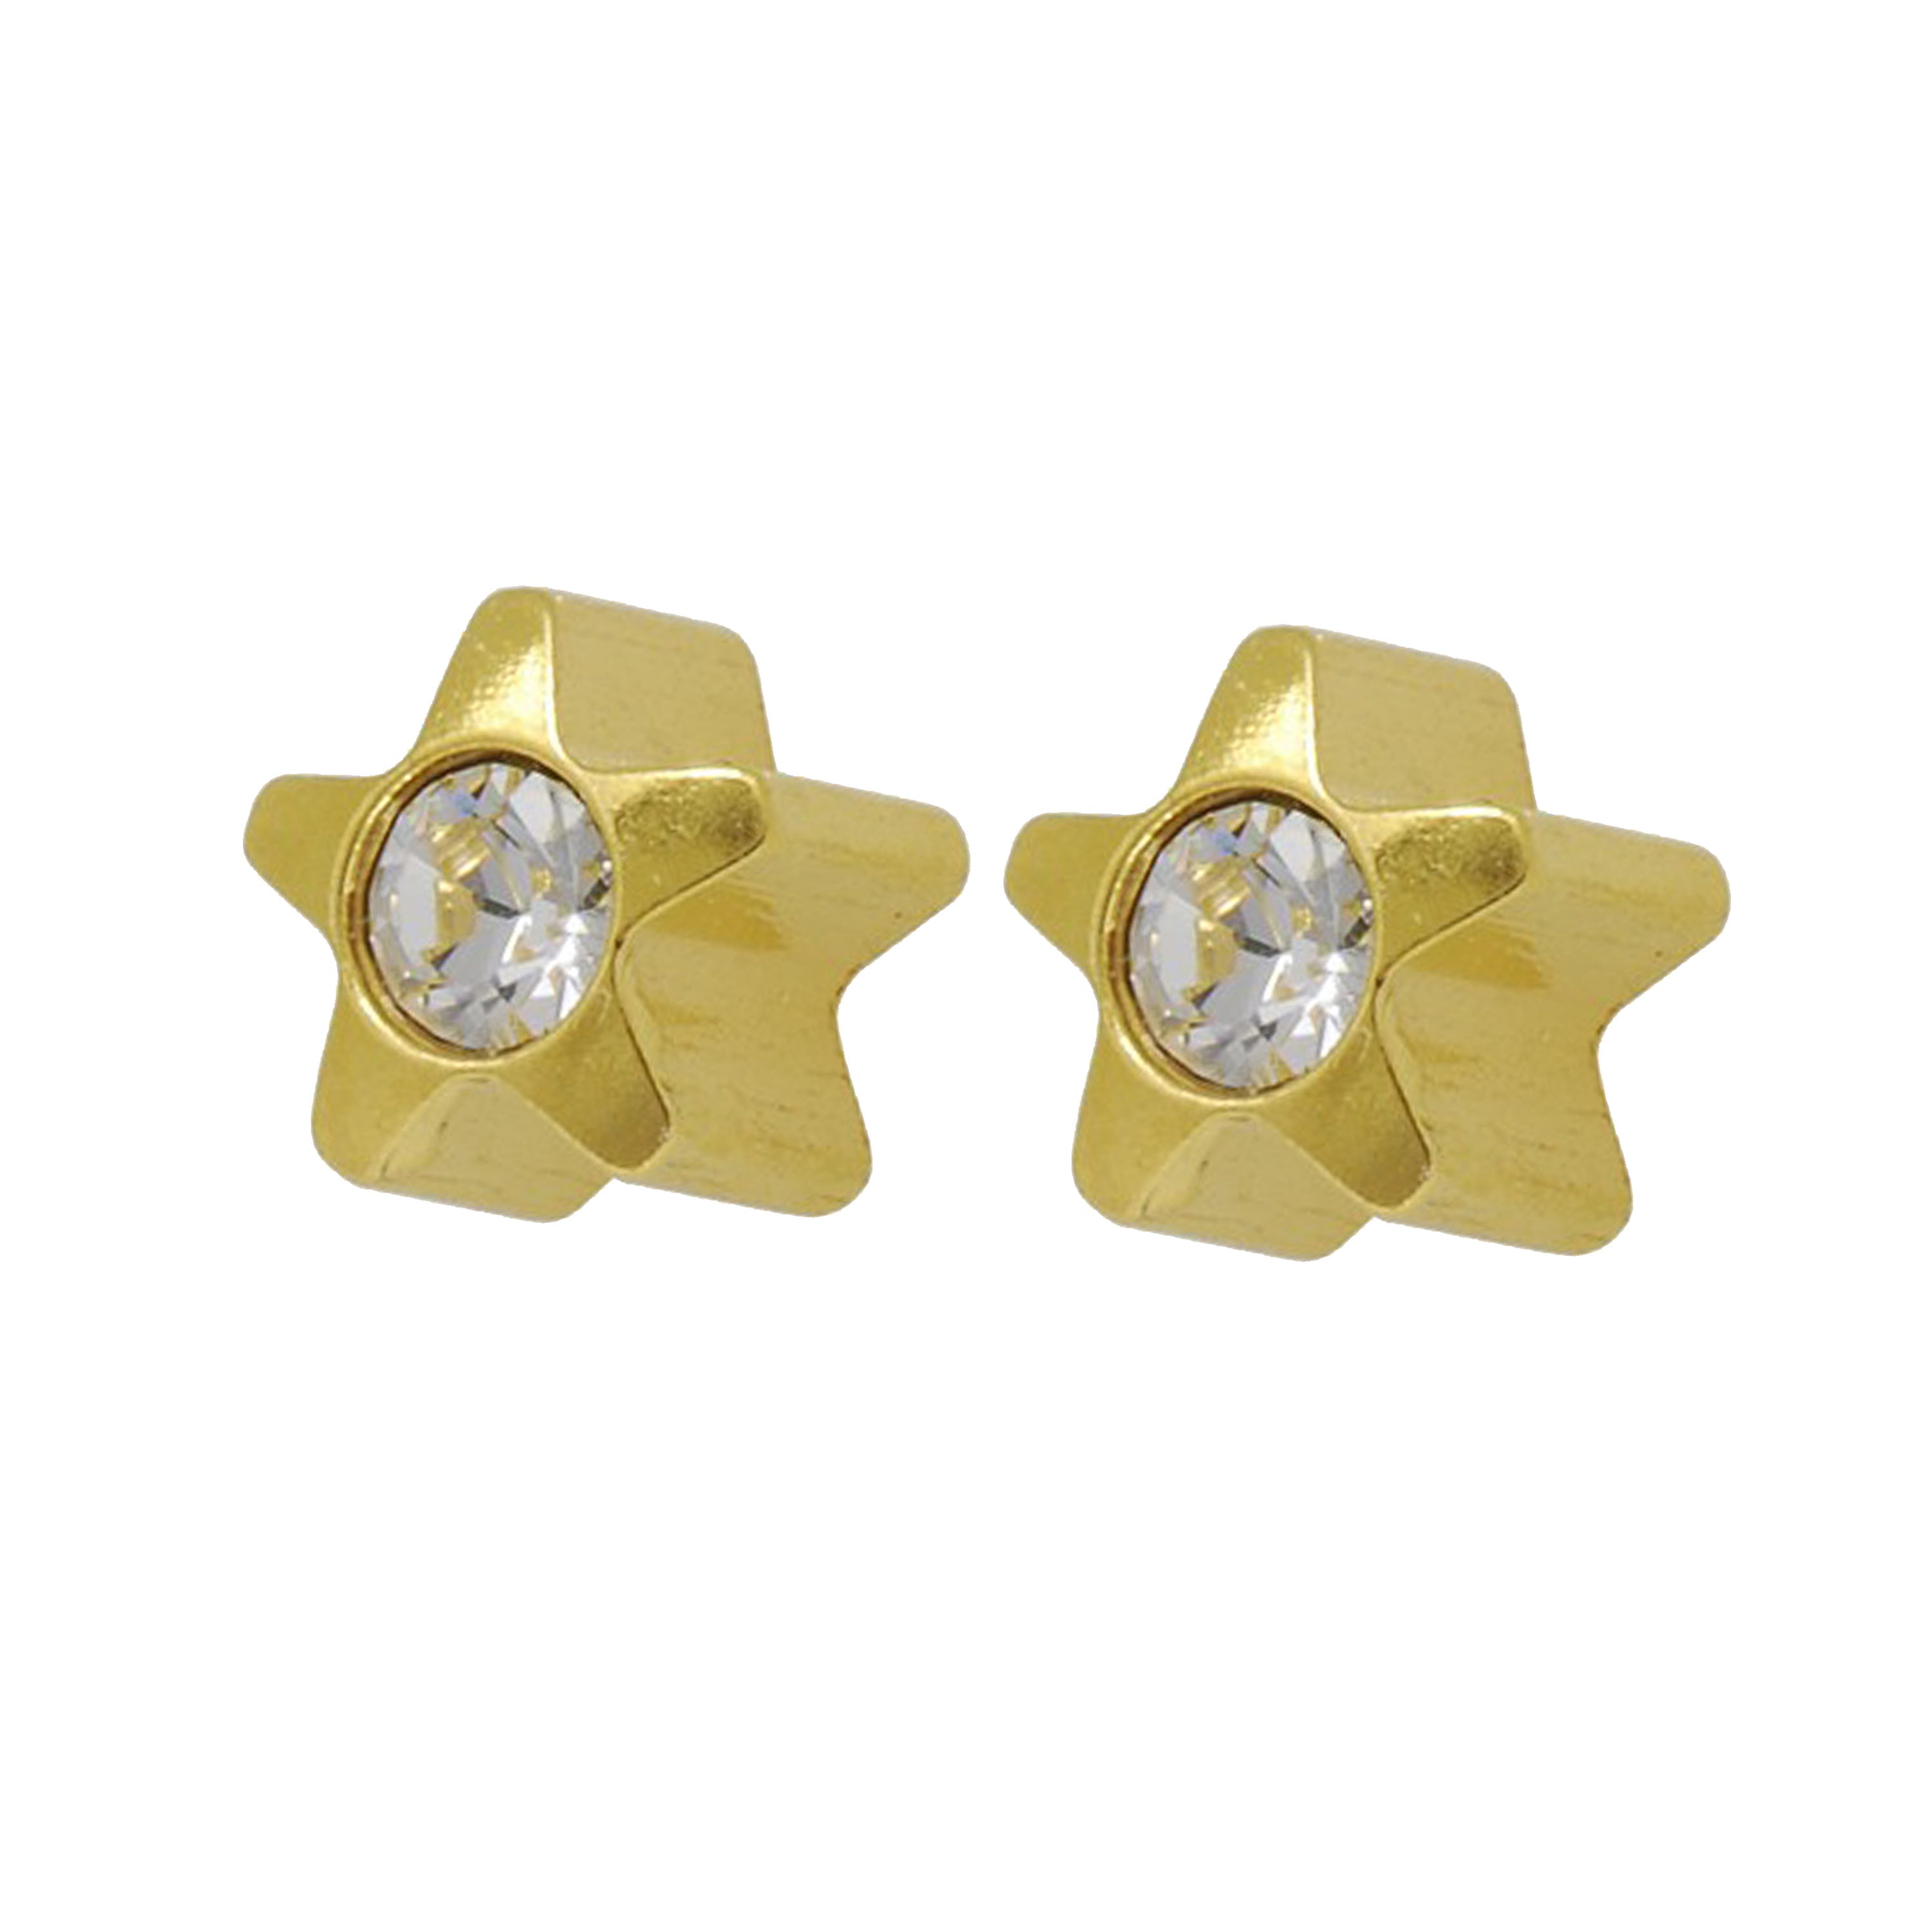 3MM STARLITE Studs 24K Pure Gold Plated Ear Studs | MADE IN USA | Ideal for everyday wear